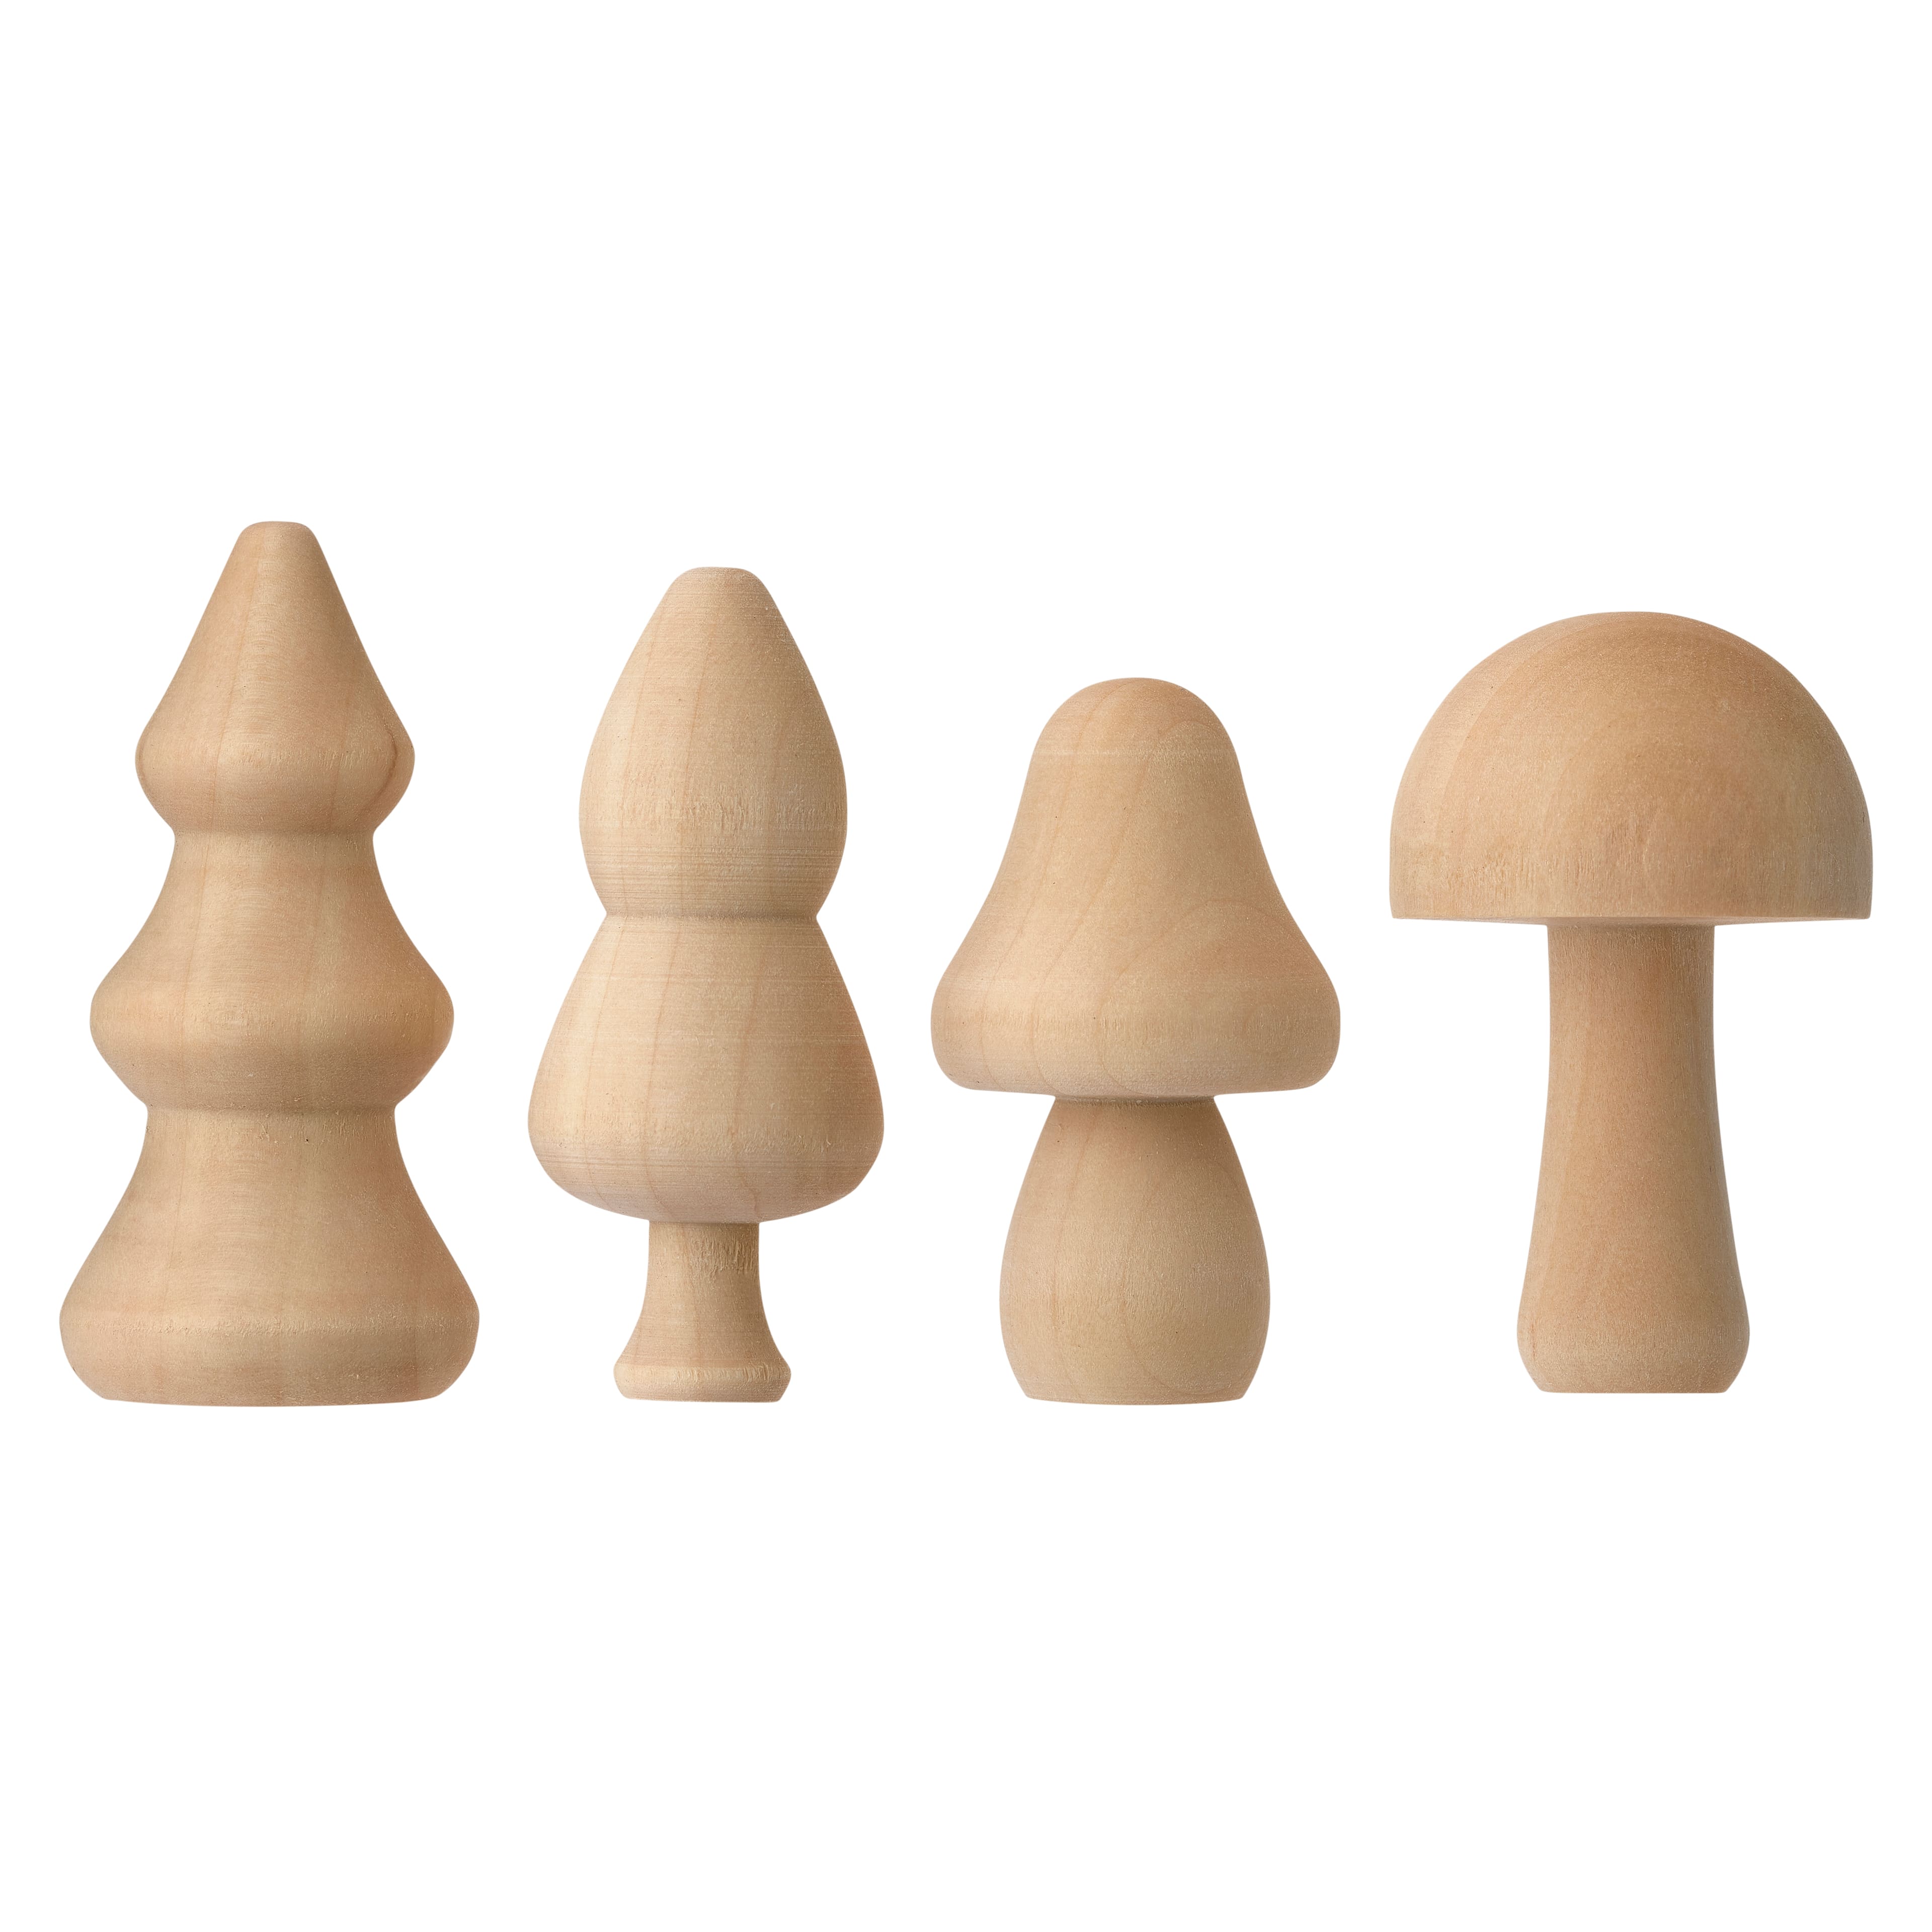 Cut Wooden Shapes - 250 Unfinished Assorted Craft and Hobby Shapes